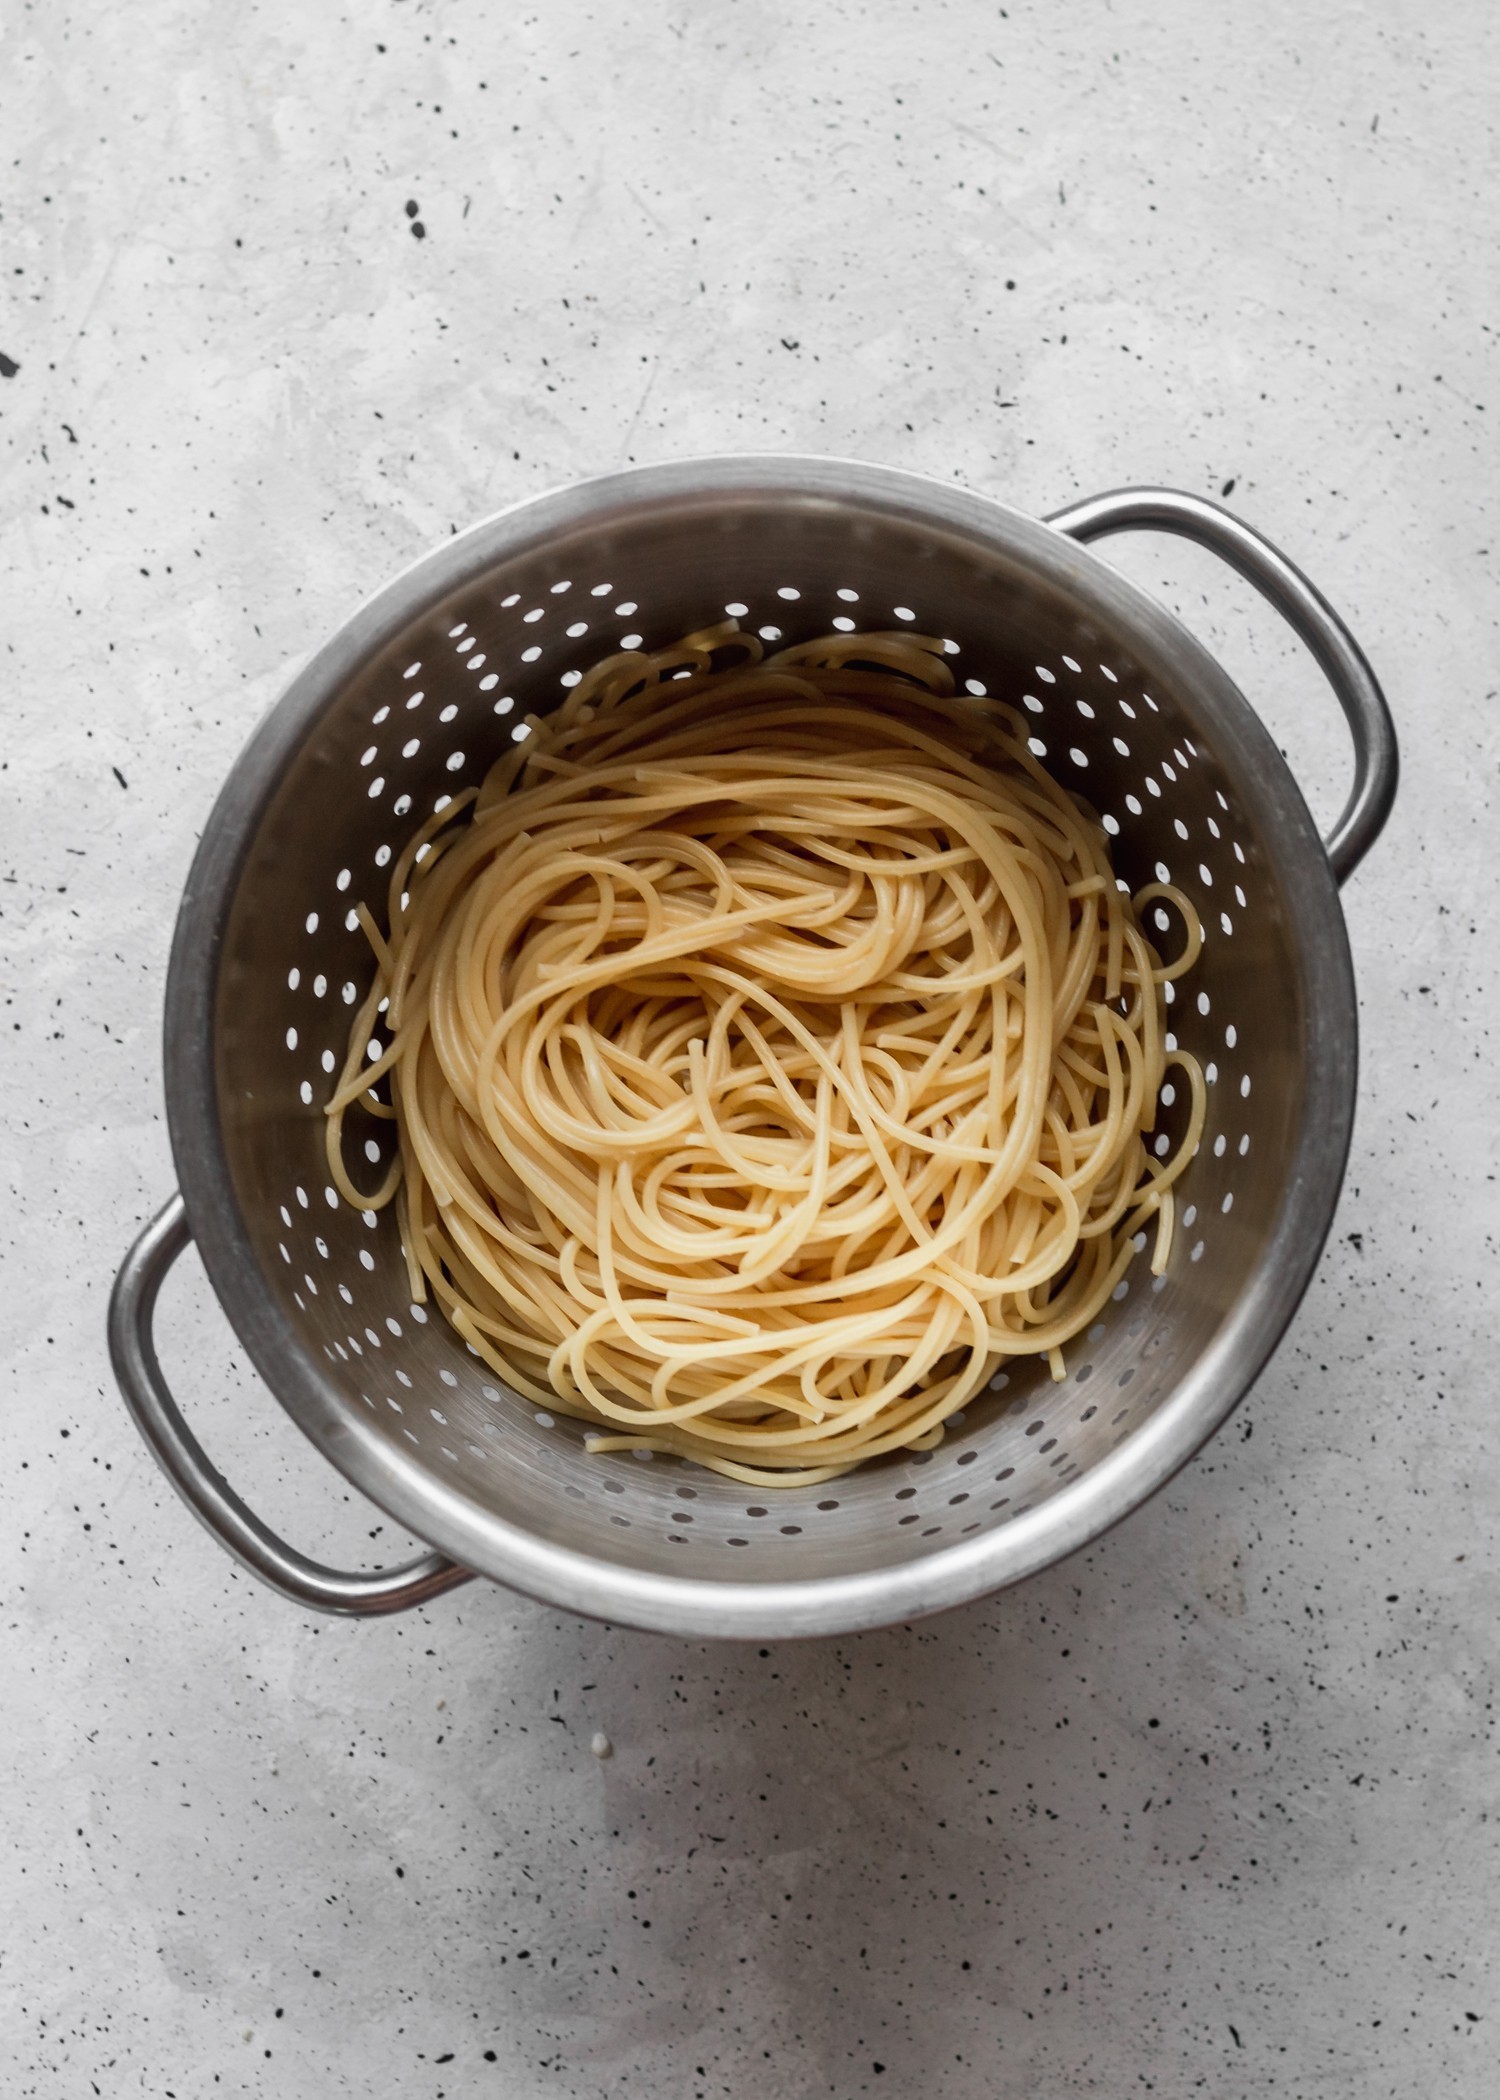 A bird's eye photo of a pasta strainer filled with spaghetti on a grey speckled table.